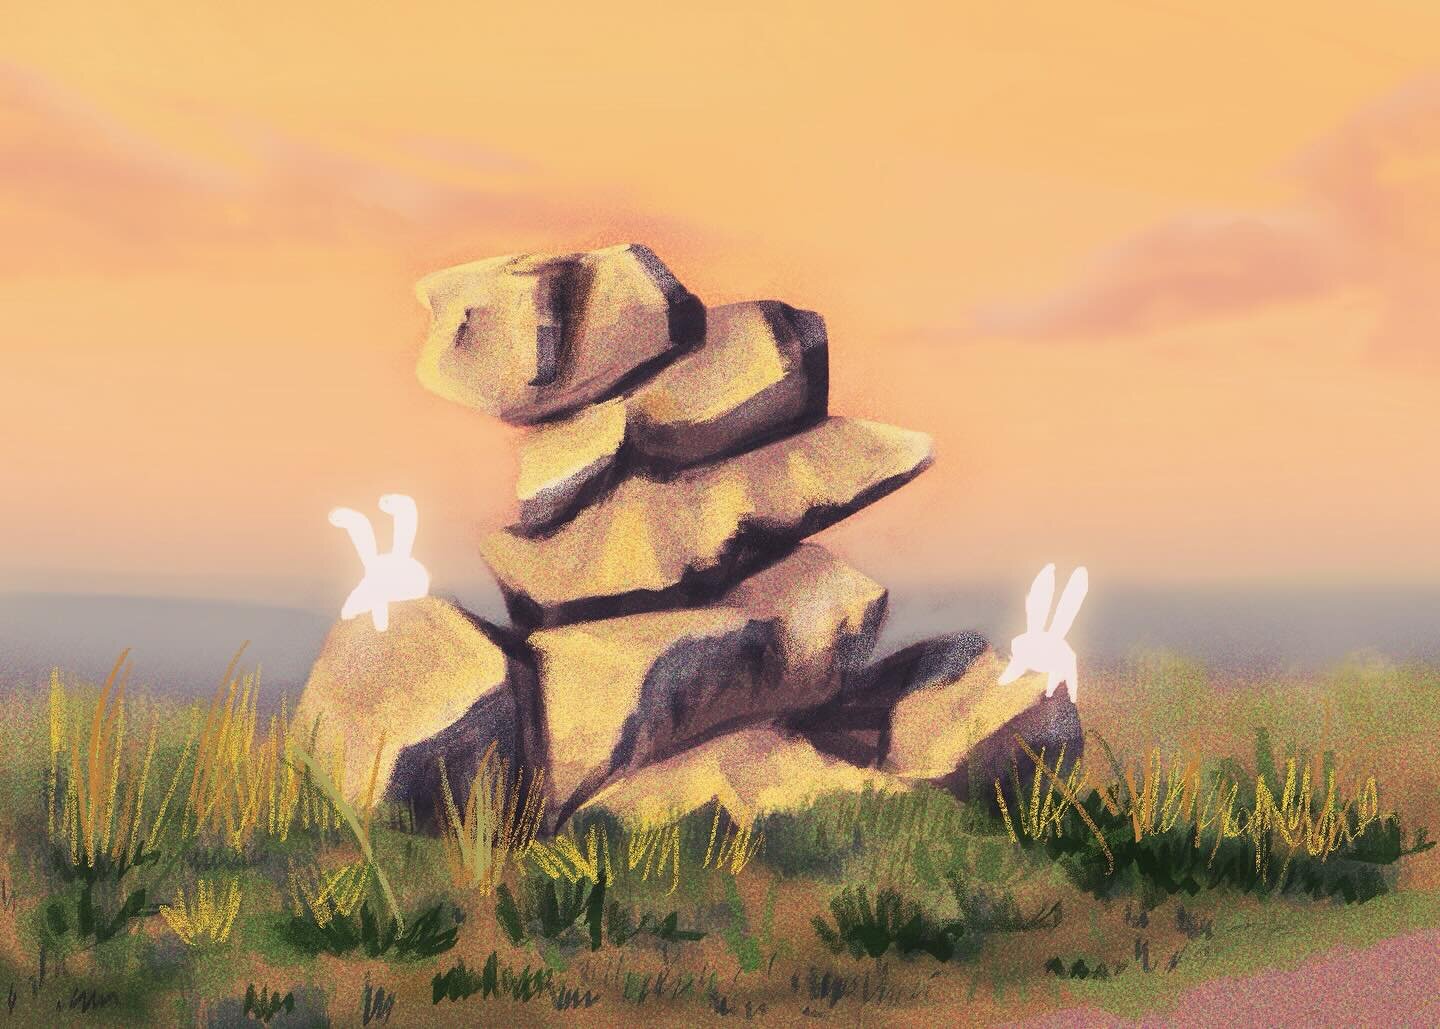 At sunset the little bunnies pay a visit to their favorite pile of rocks by the abandoned path. 🐰 #procreateartwork #ipadillustration